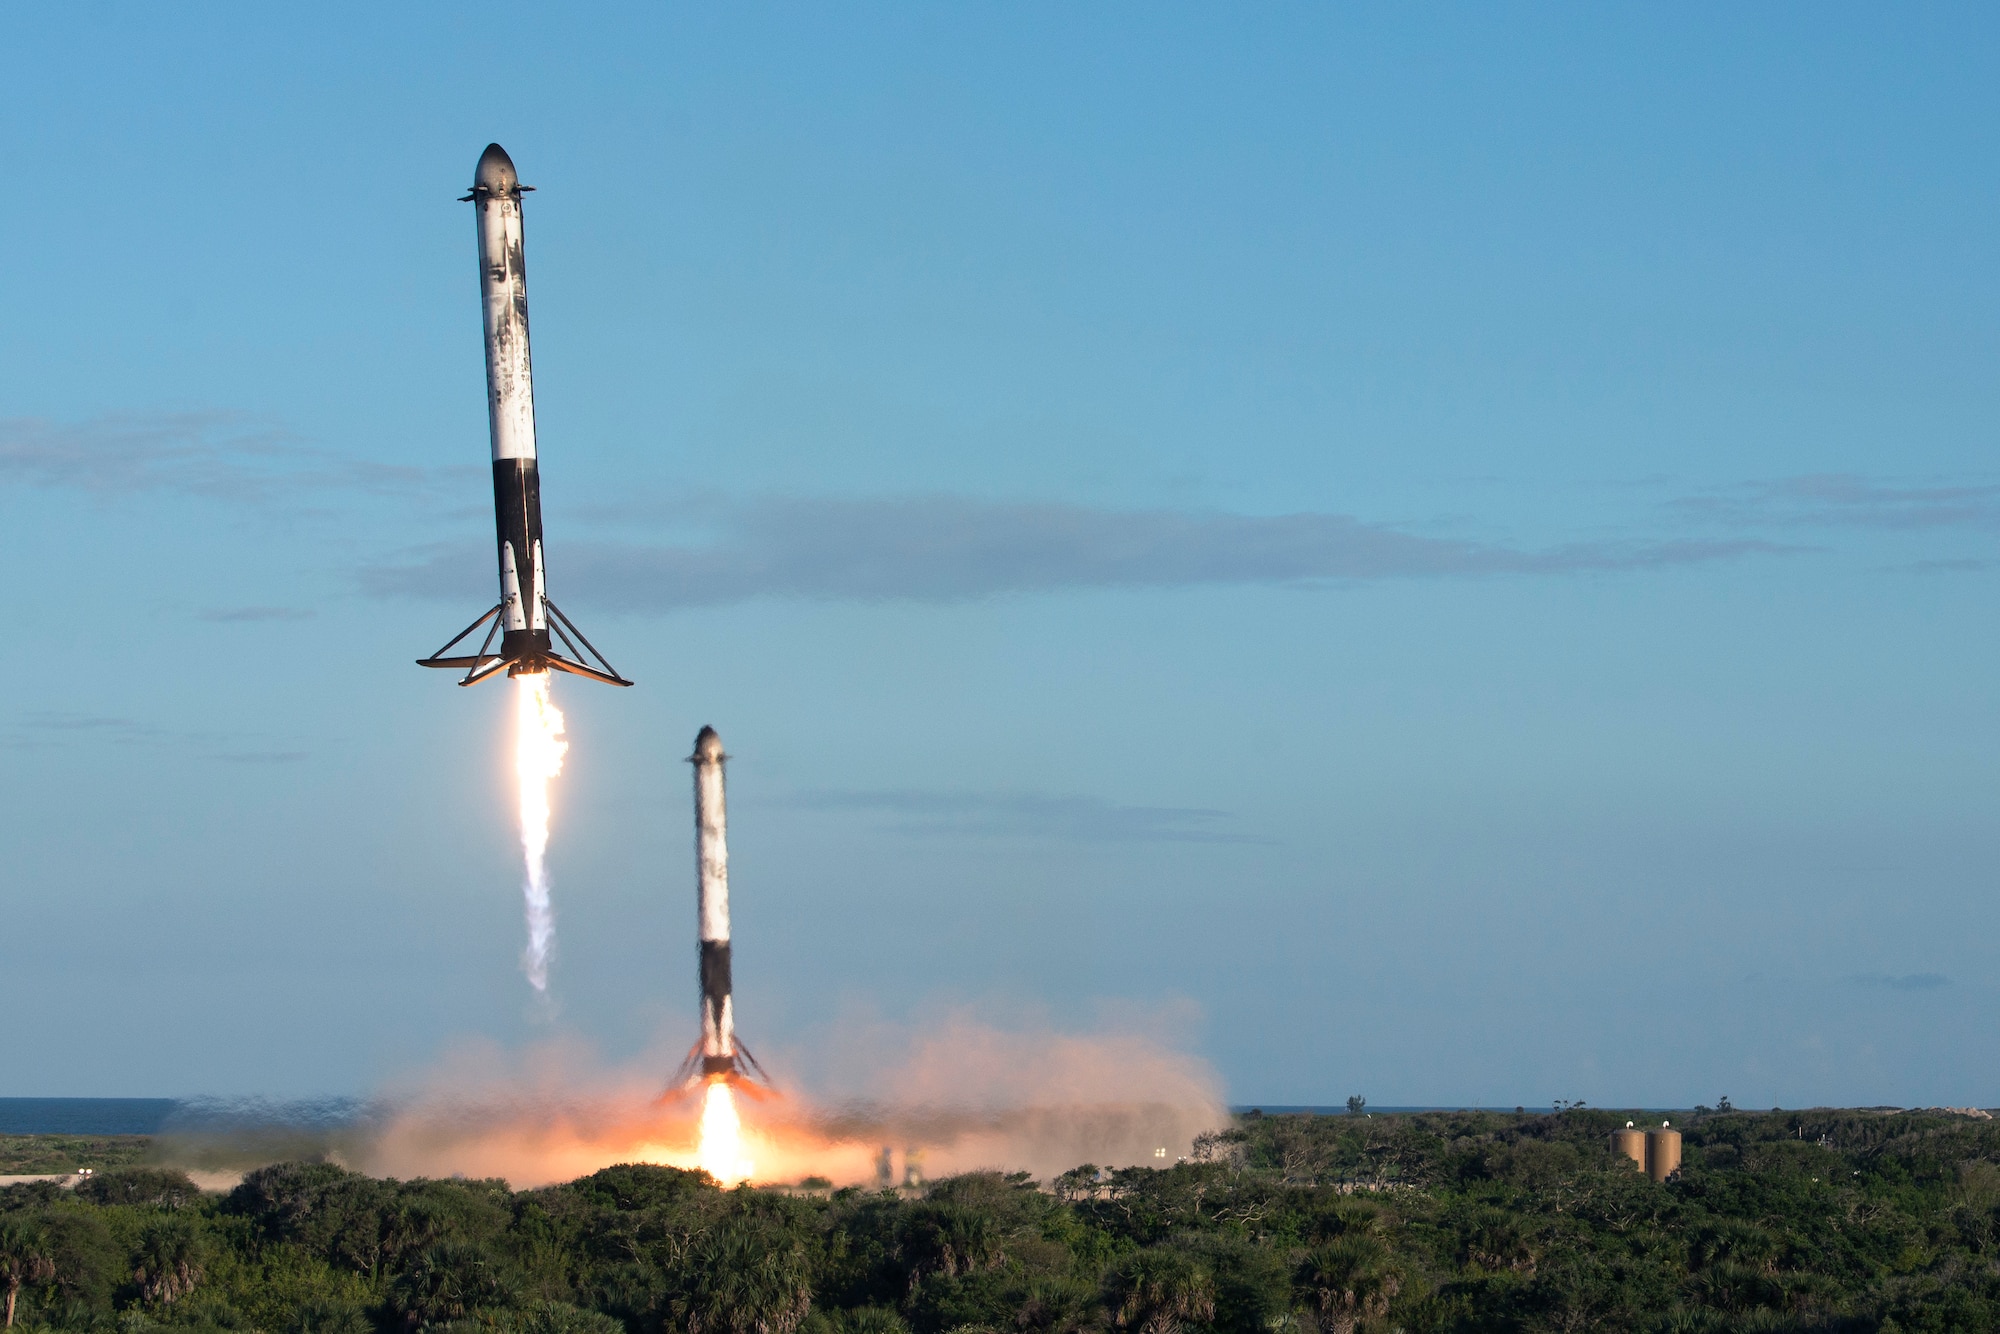 Two reusable rocket boosters land after the successful launch of SpaceX's Falcon